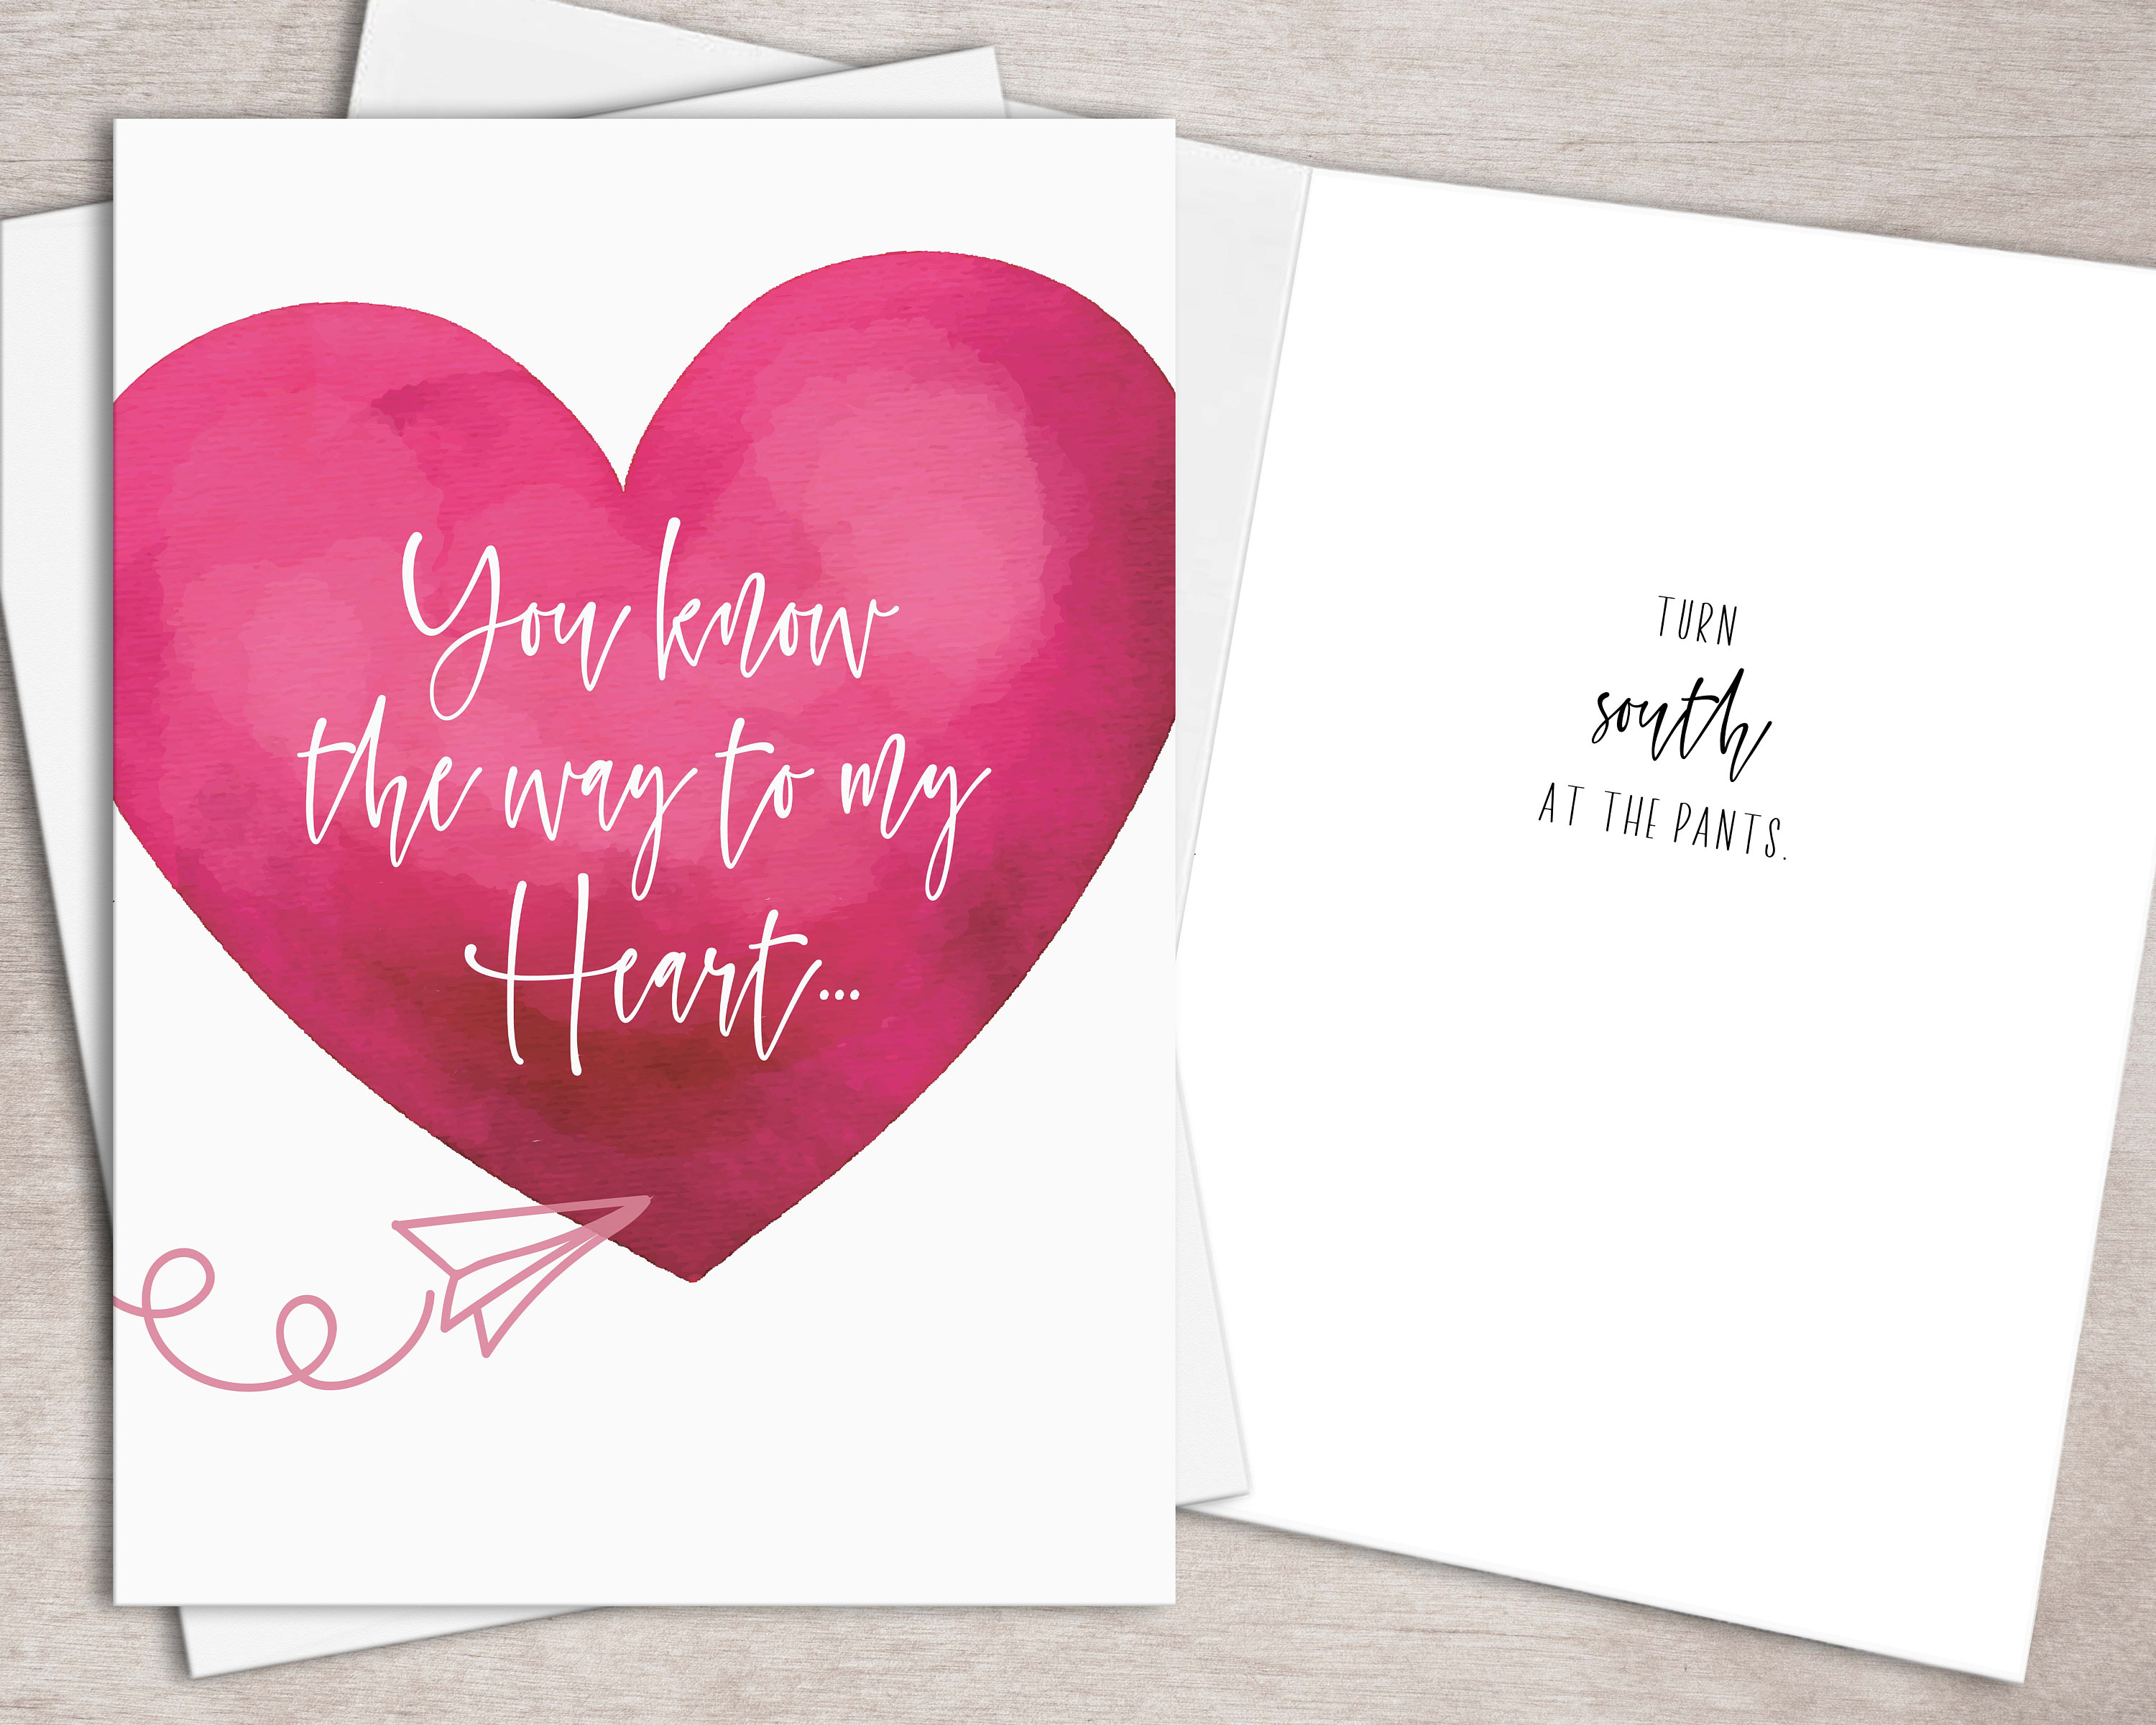 free-naughty-valentines-day-cards-i-hate-you-funny-rude-cards-huey-min-life